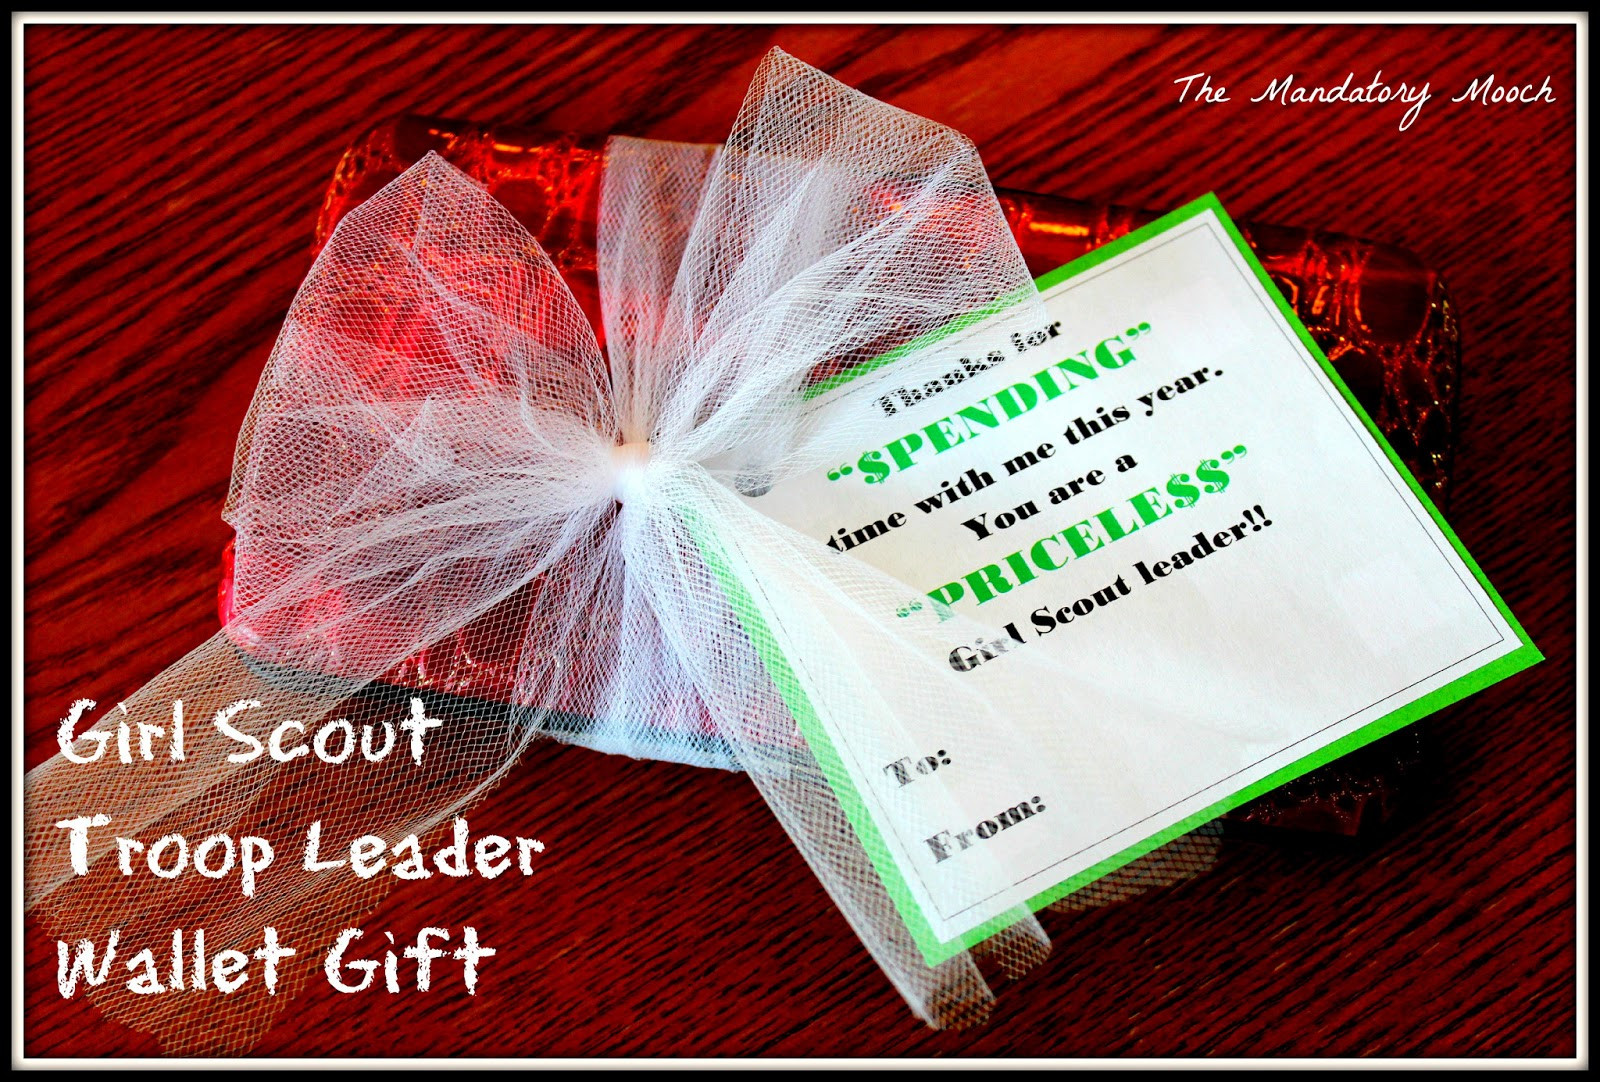 Thank You Gift Ideas For Girl Scout Leaders
 The Mandatory Mooch Teacher Wallet Gift